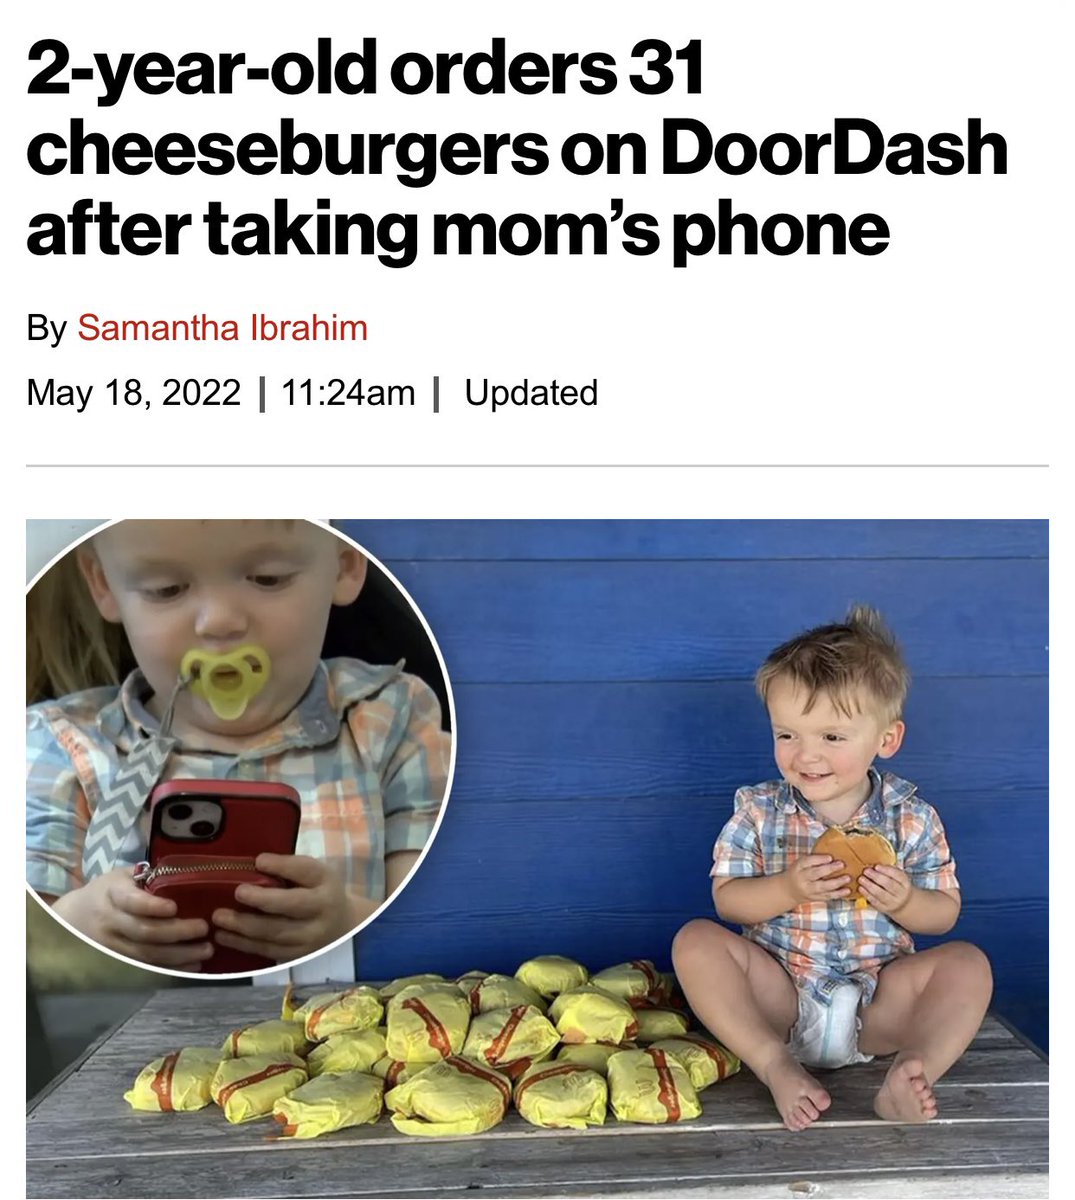 Dudes posting their wins - 2 year old orders 31 cheeseburgers - 2yearold orders 31 cheeseburgers on DoorDash after taking mom's phone By Samantha Ibrahim | am | Updated